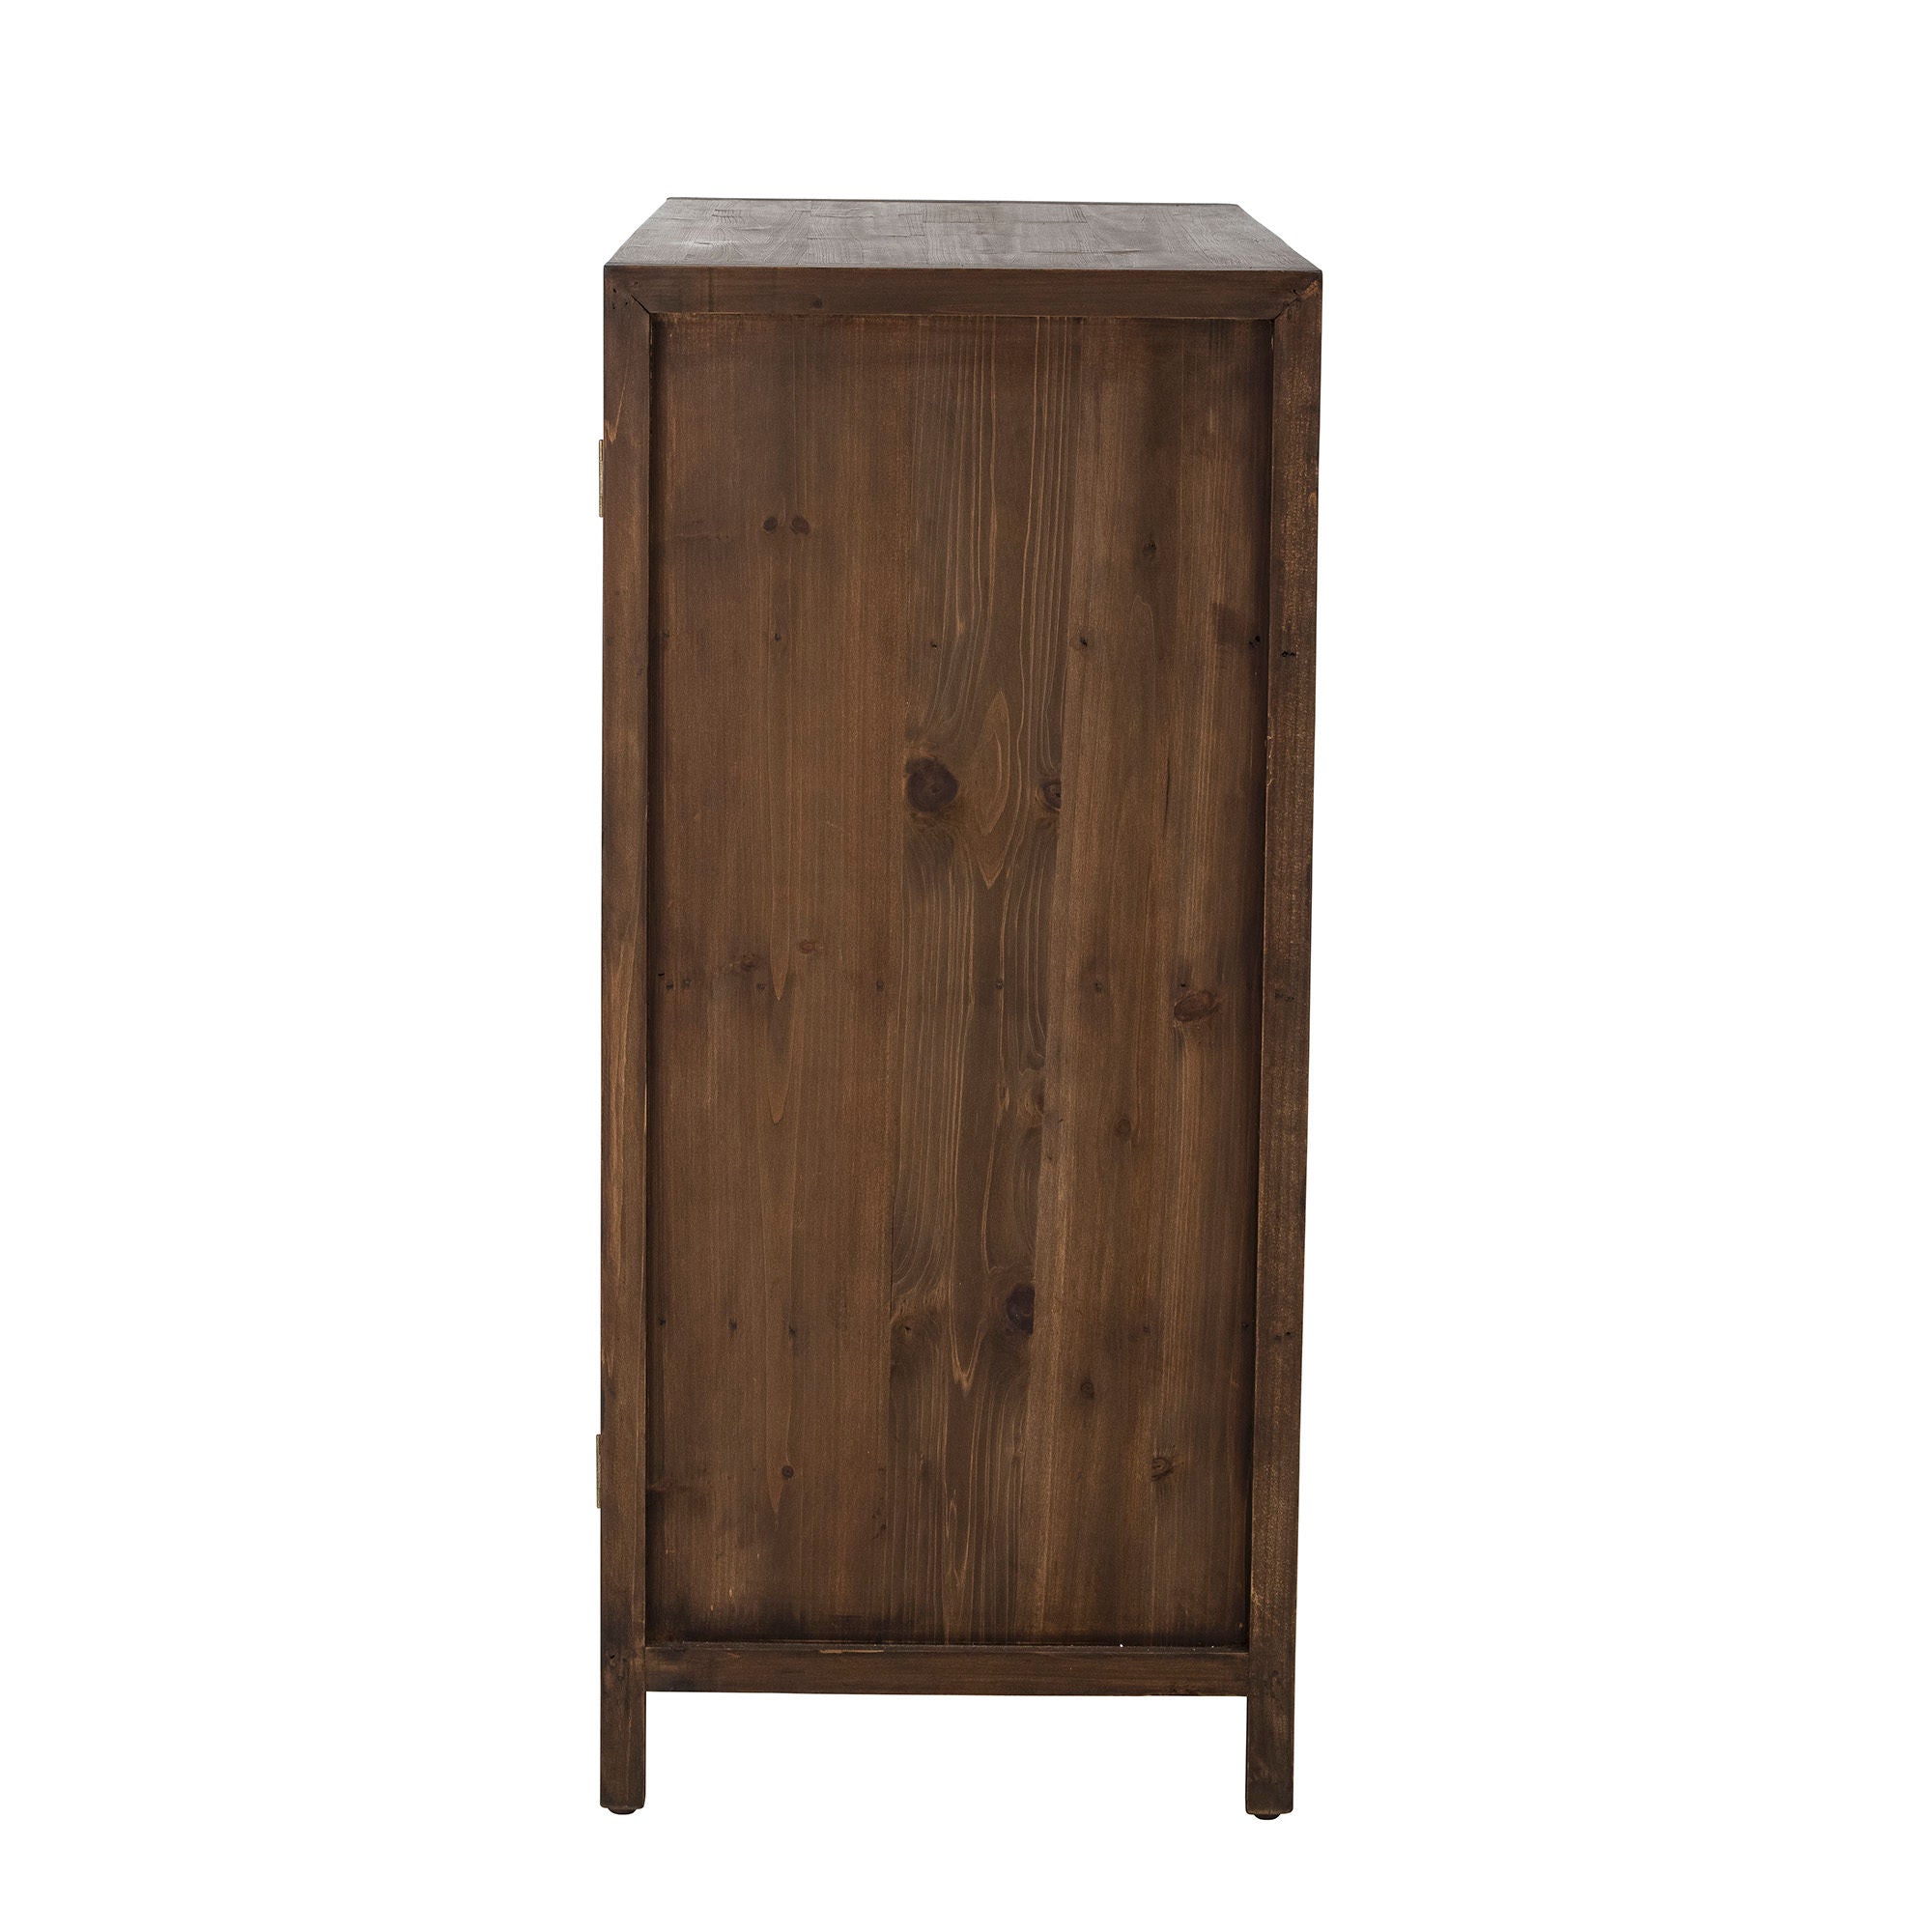 Collection créative Marl Marl Cabinet, Brown, Firwood